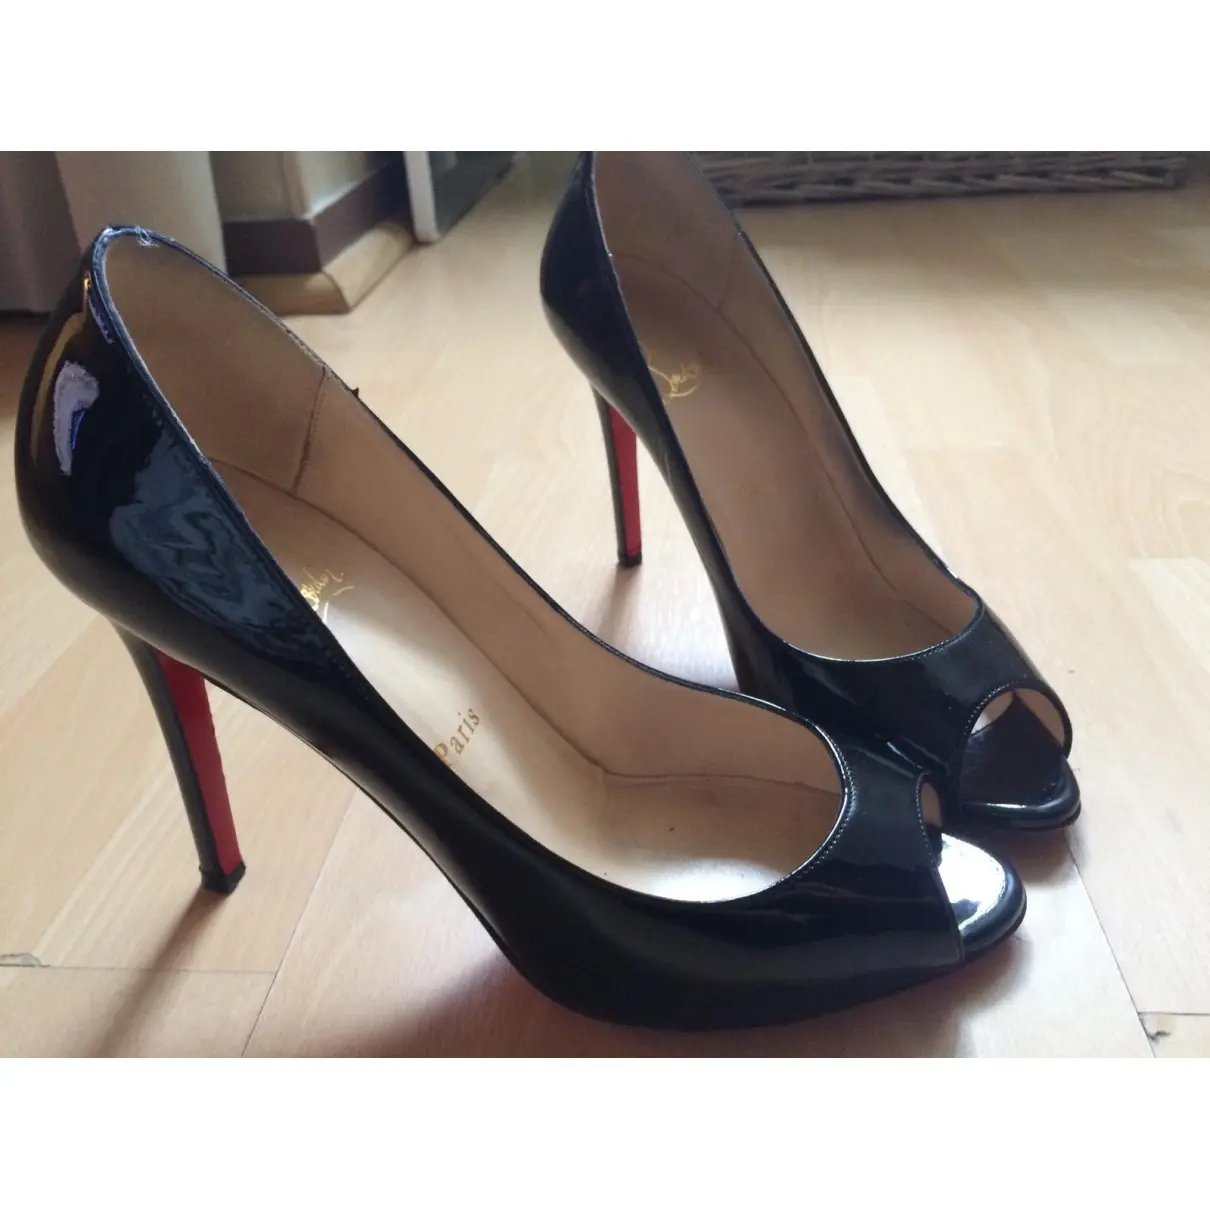 Buy Christian Louboutin Patent leather pumps online